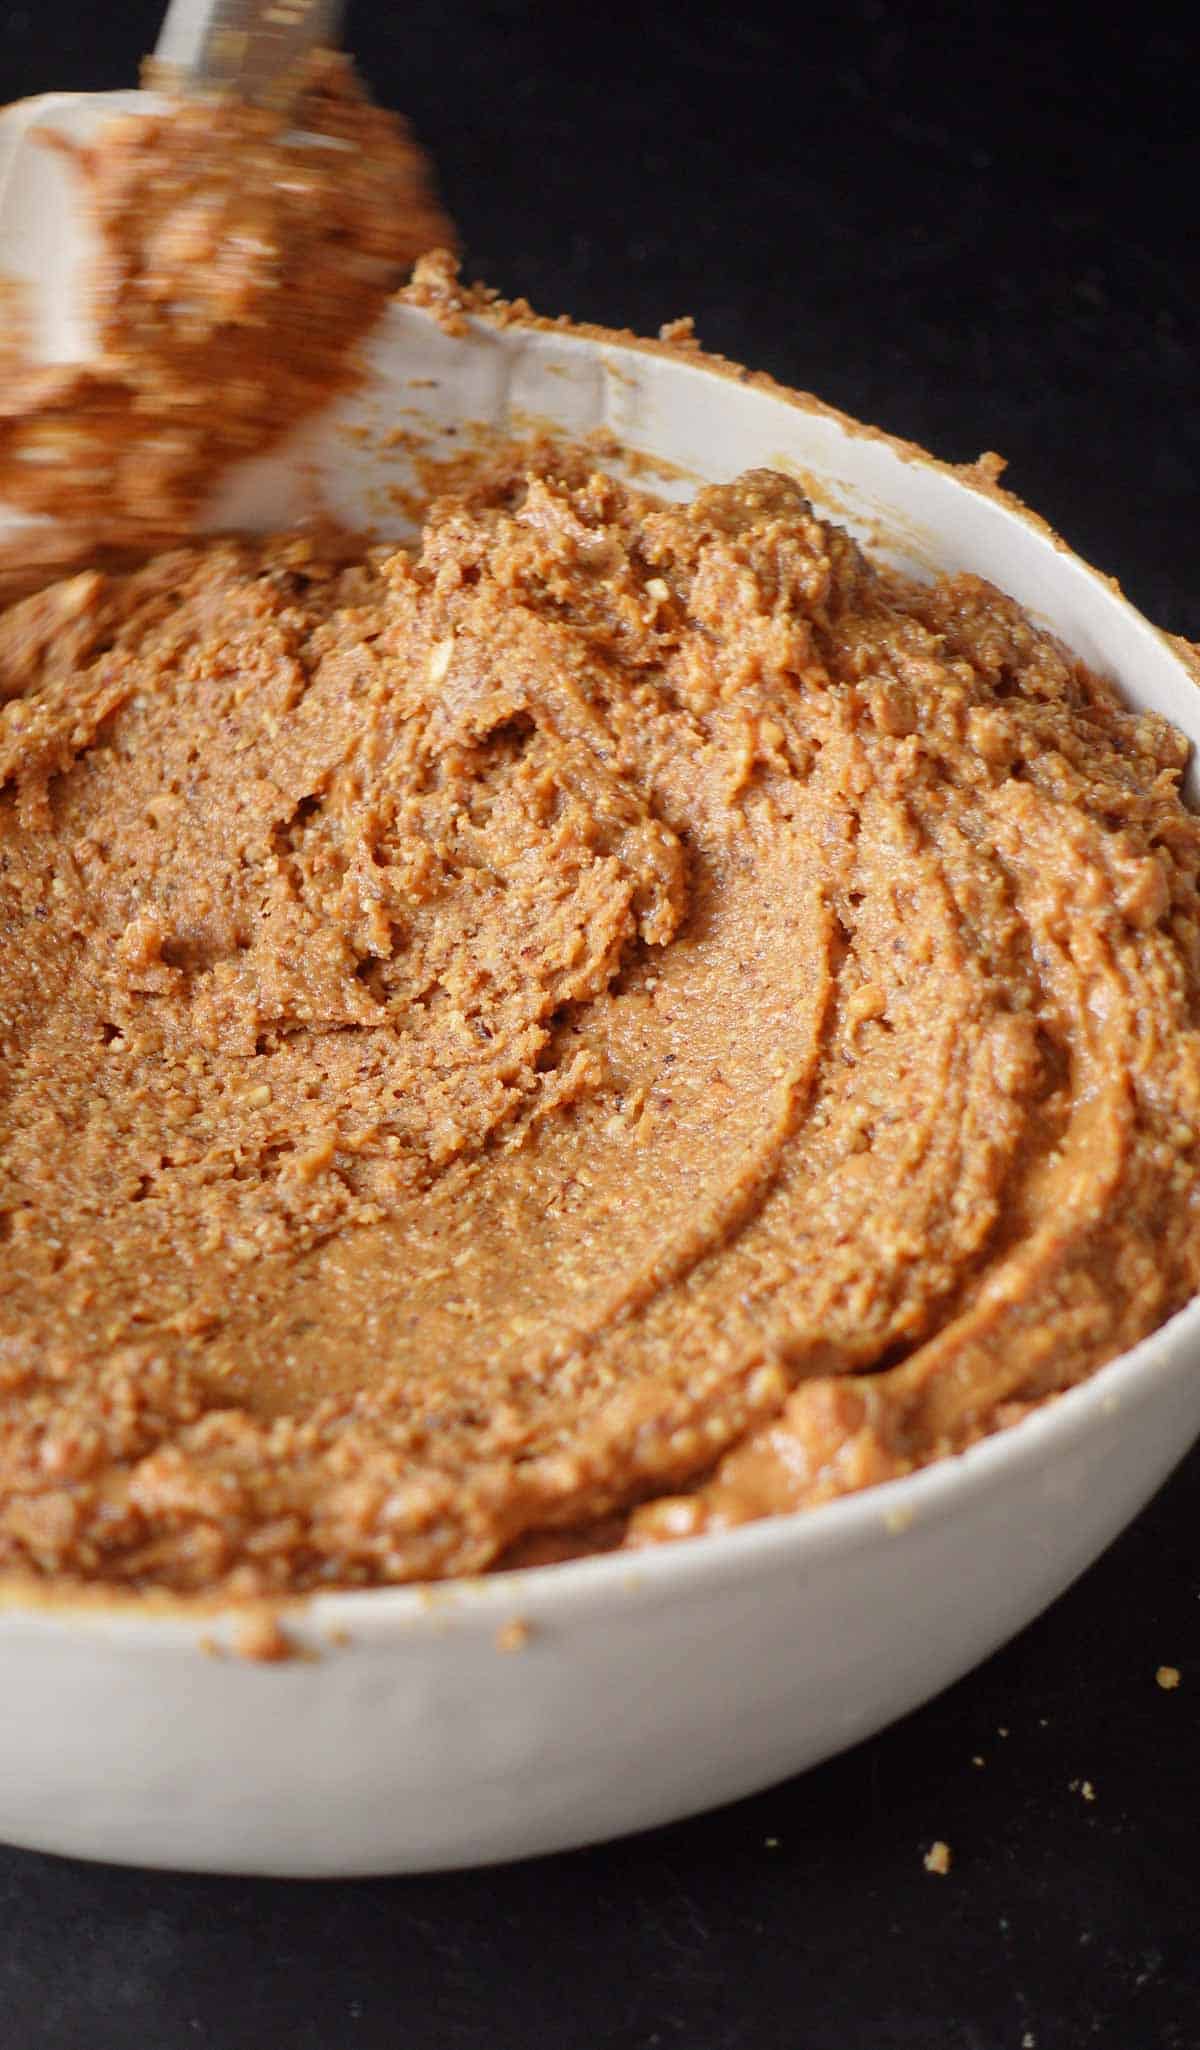 peanutbutter mixture after being properly mixed